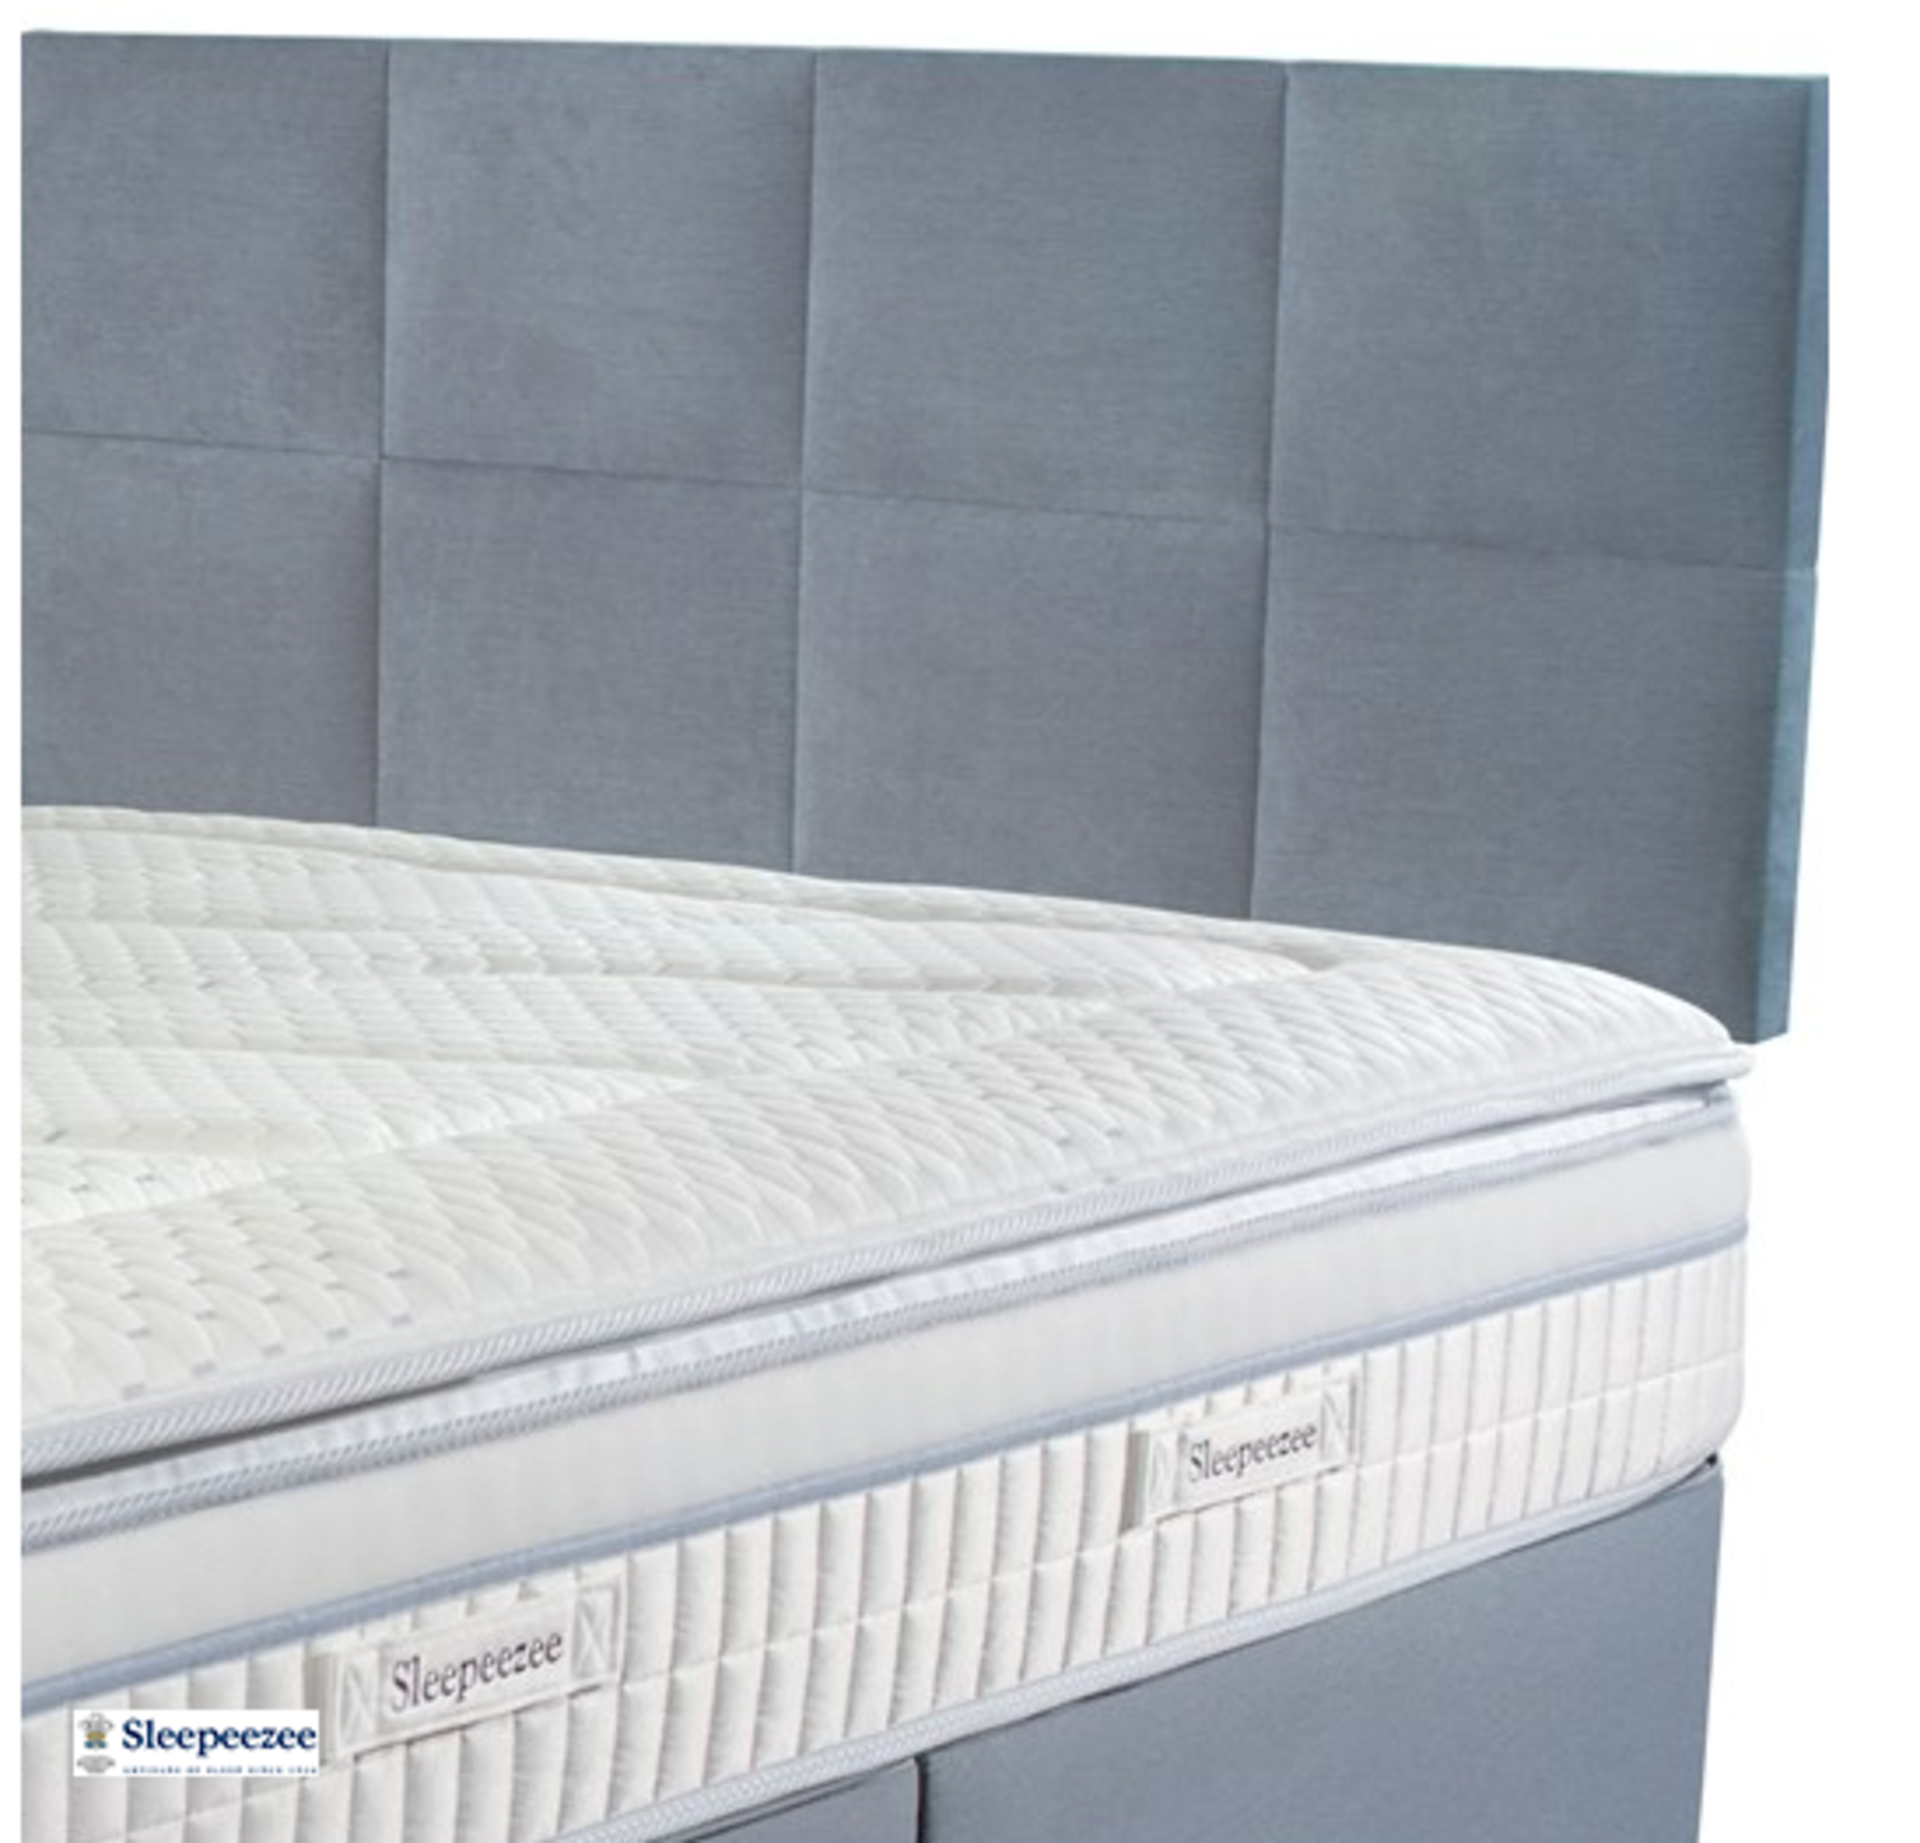 | 1X | SLEEPEEZEE MONTANA HEADBOARD 4FT6 DOUBLE PEWTER | GOOD CONDITION PACKAGED | RRP £299 |